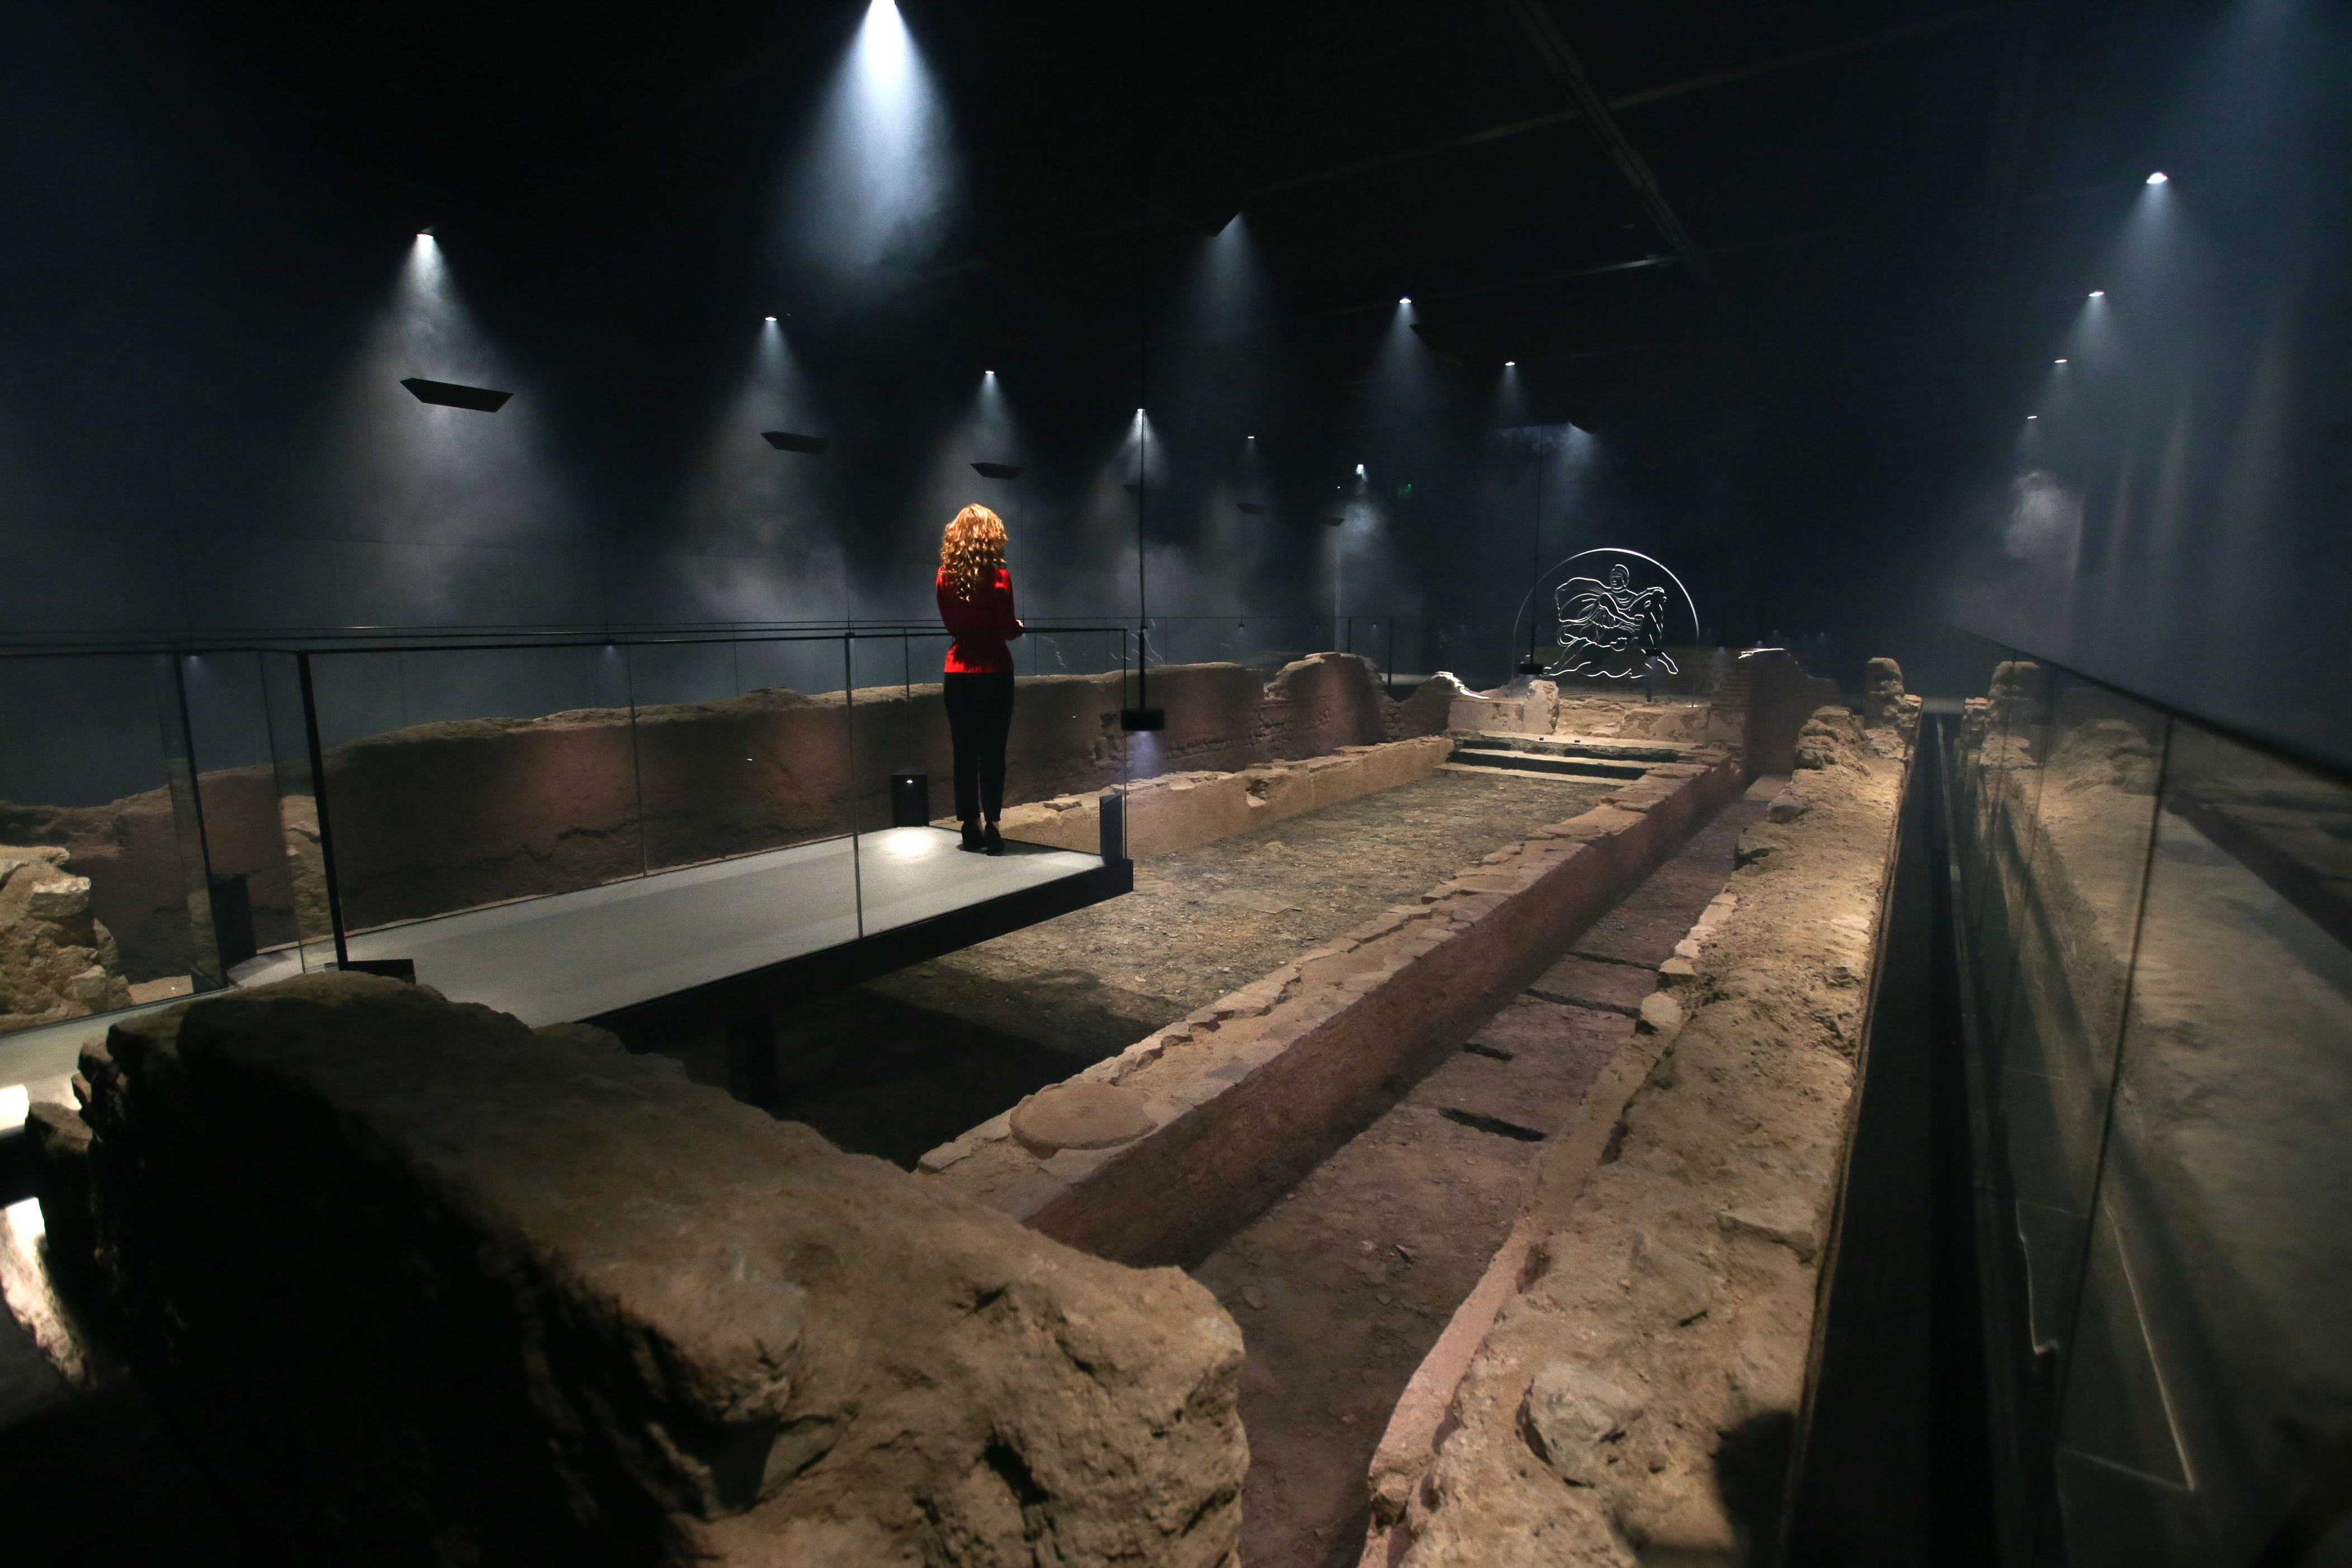 Slide 28 of 77: An employee poses alongside a reconstruction of the Roman Temple of Mithras, recreated on the site of its original discovery, during a press preview at the London Mithraeum, Bloomberg SPACE, at the new Bloomberg headquarters in central London, on November 7, 2017.
The third century reconstructed temple, sits seven meters below the City of London. / AFP PHOTO / Daniel LEAL-OLIVAS        (Photo credit should read DANIEL LEAL-OLIVAS/AFP/Getty Images)